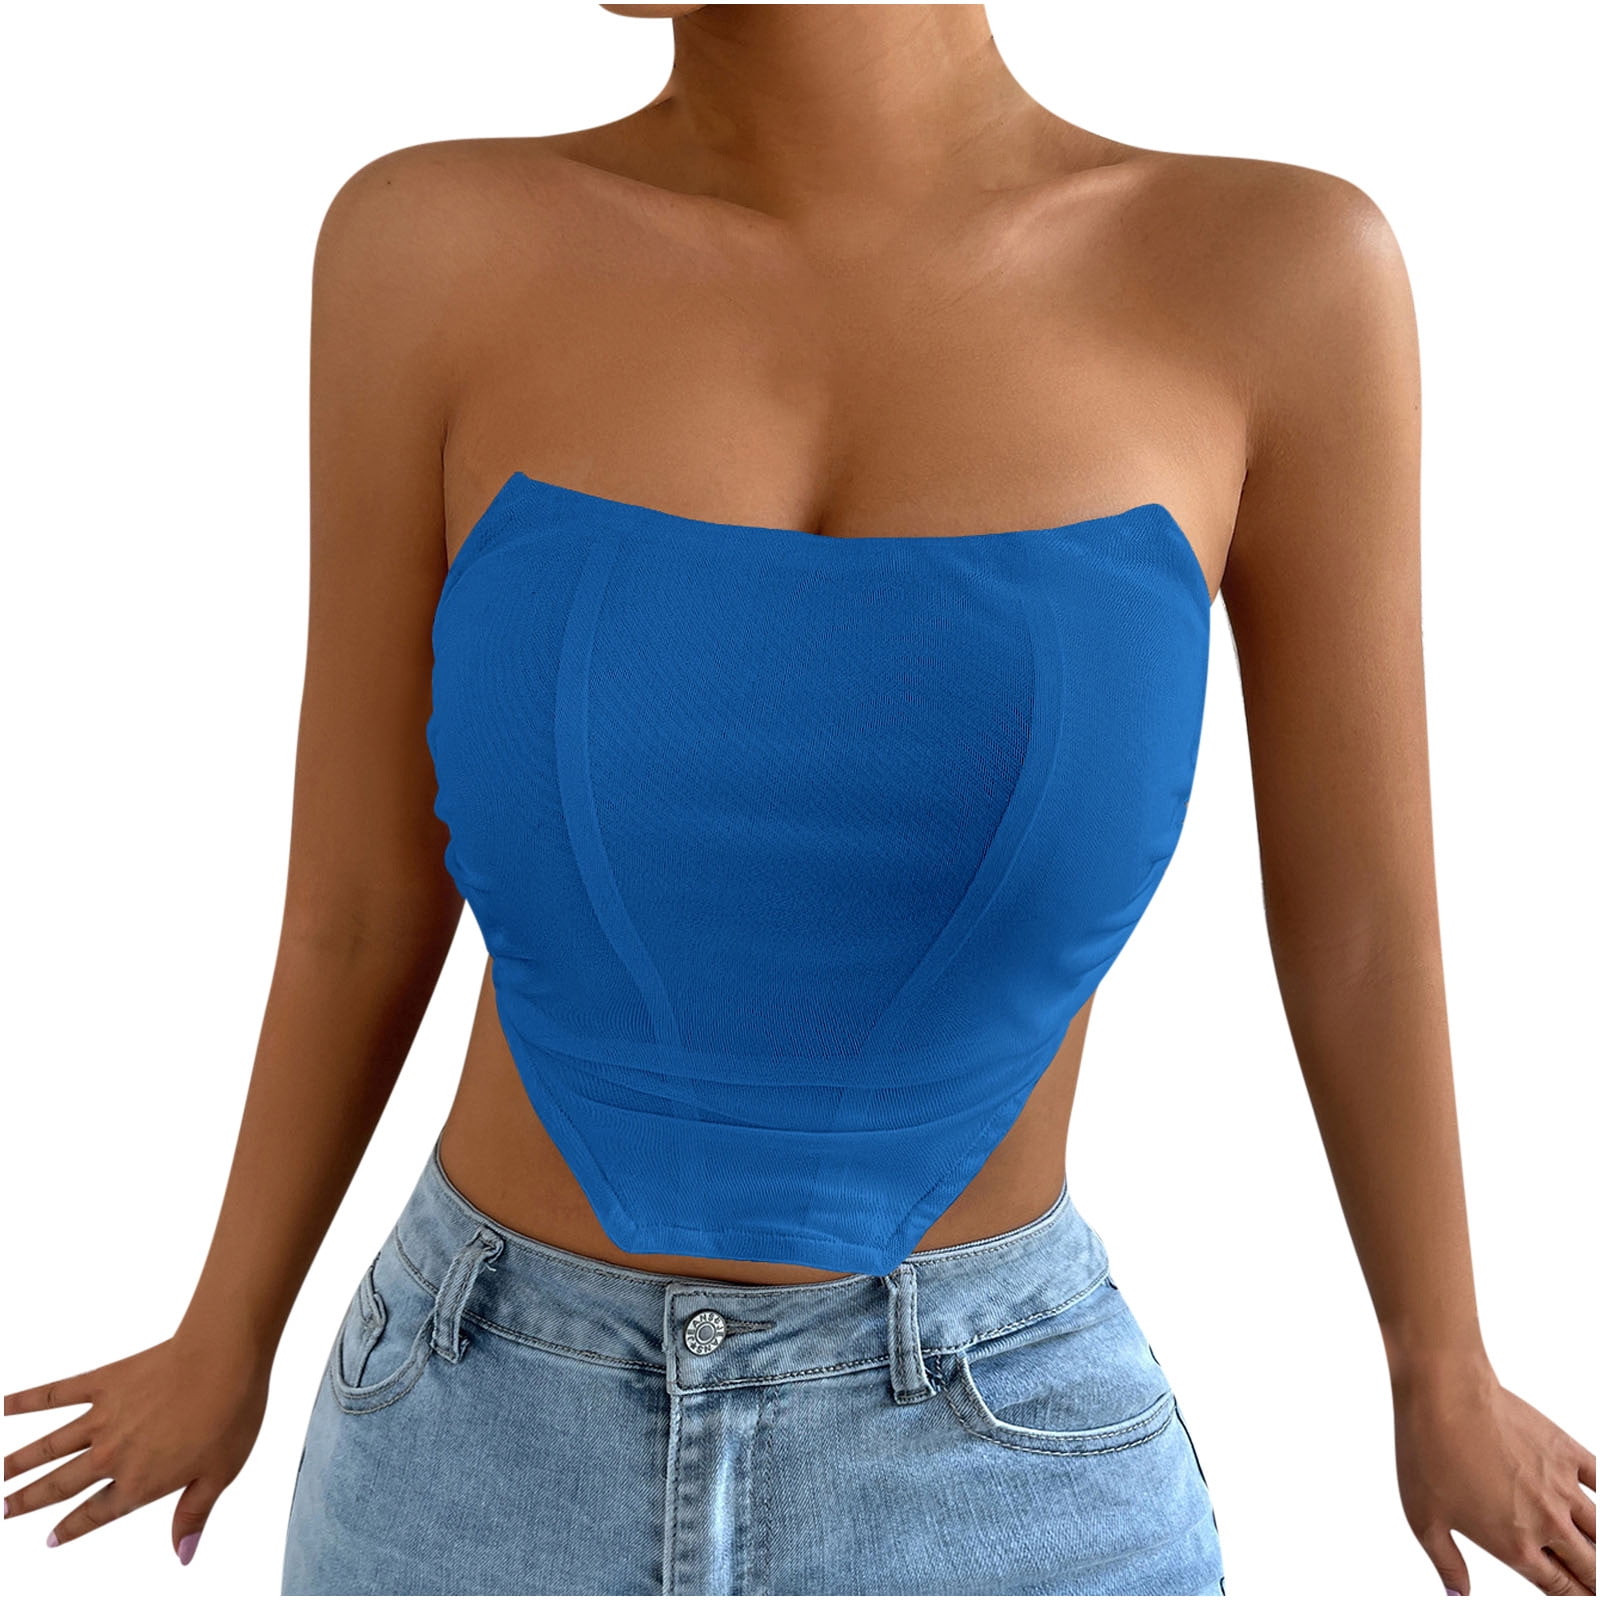 Blue Crop Tube Top, Cropped Tube Top, Crop Tops for Women, Cropped